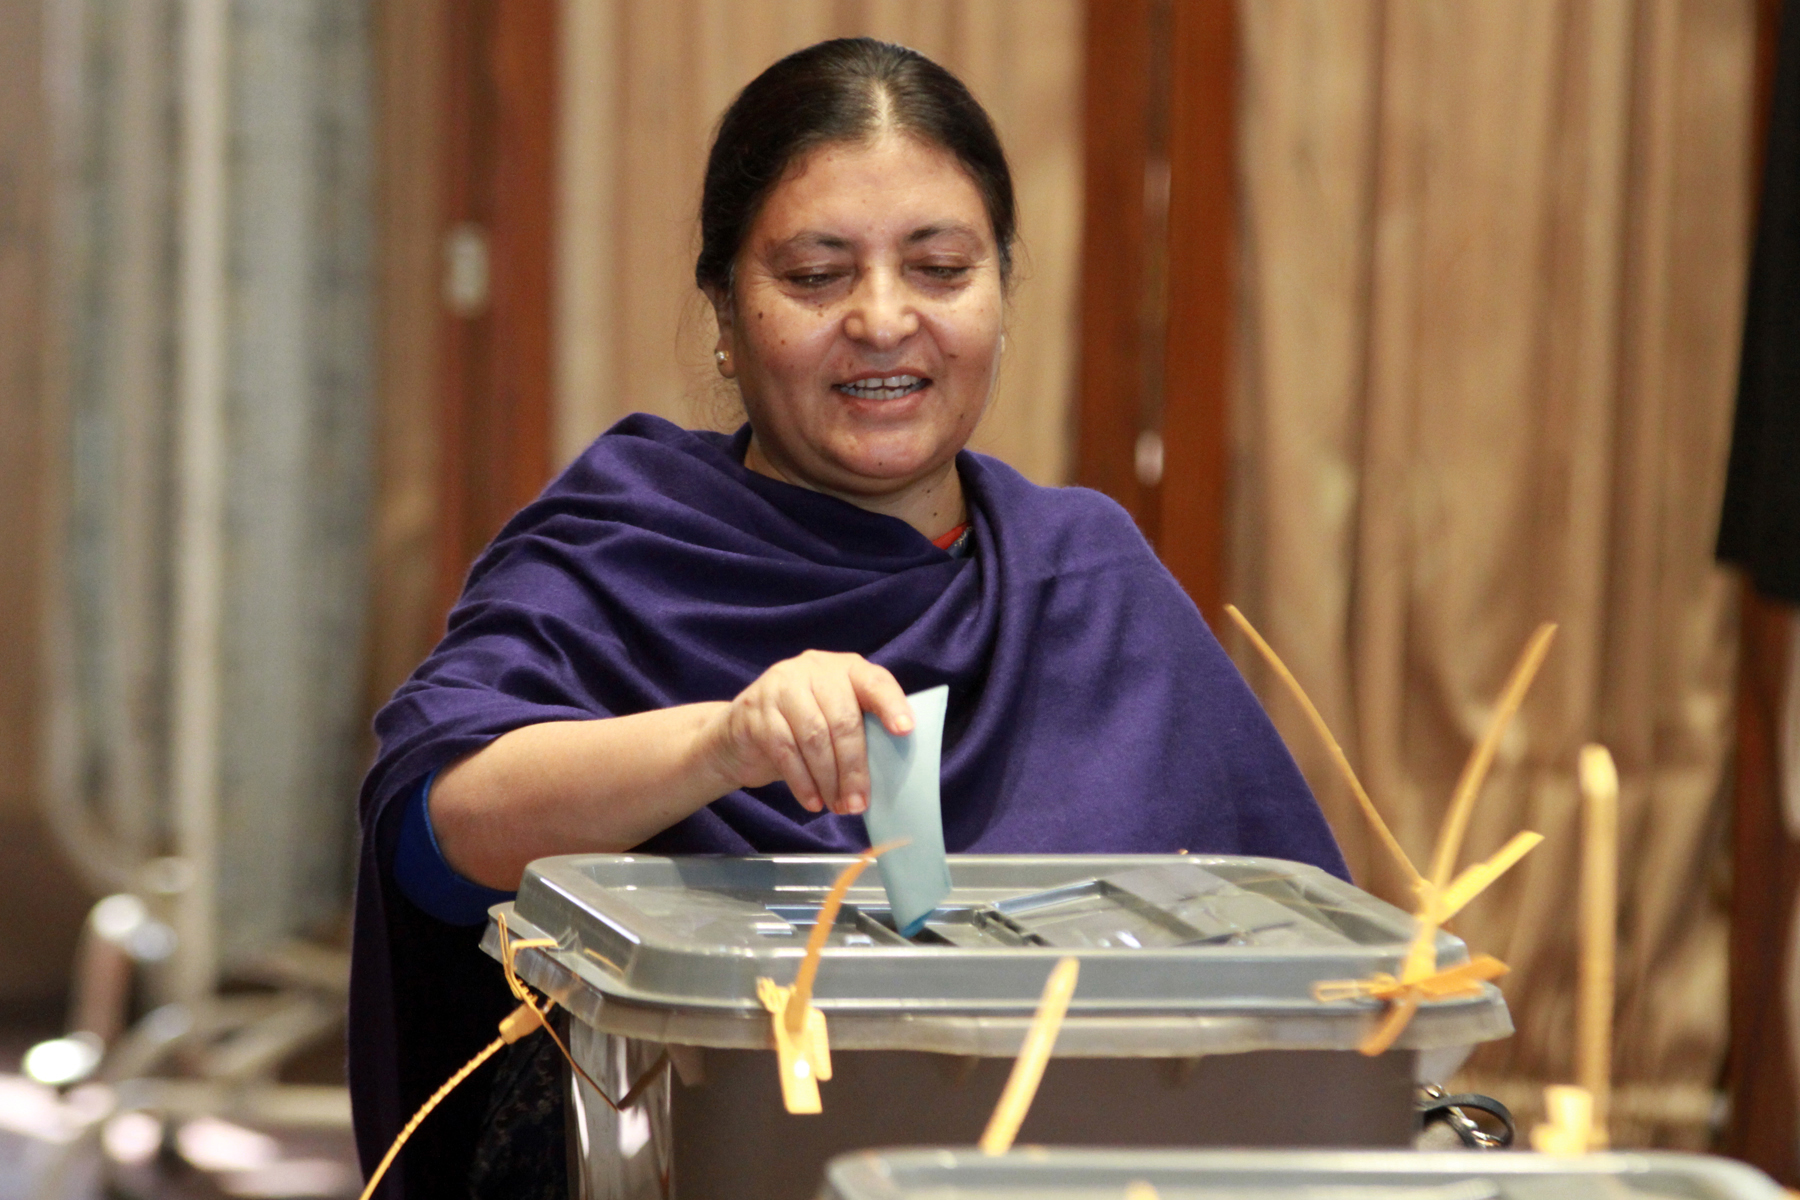 CPN-UML Vice-Chairperson Bidya Devi Bhandari cast her vote during the presidential election at the Legislature-Parliament in New Baneshwor on Wednesday, October 28, 2015. She is one of the contendors for the election. Photo: RSS